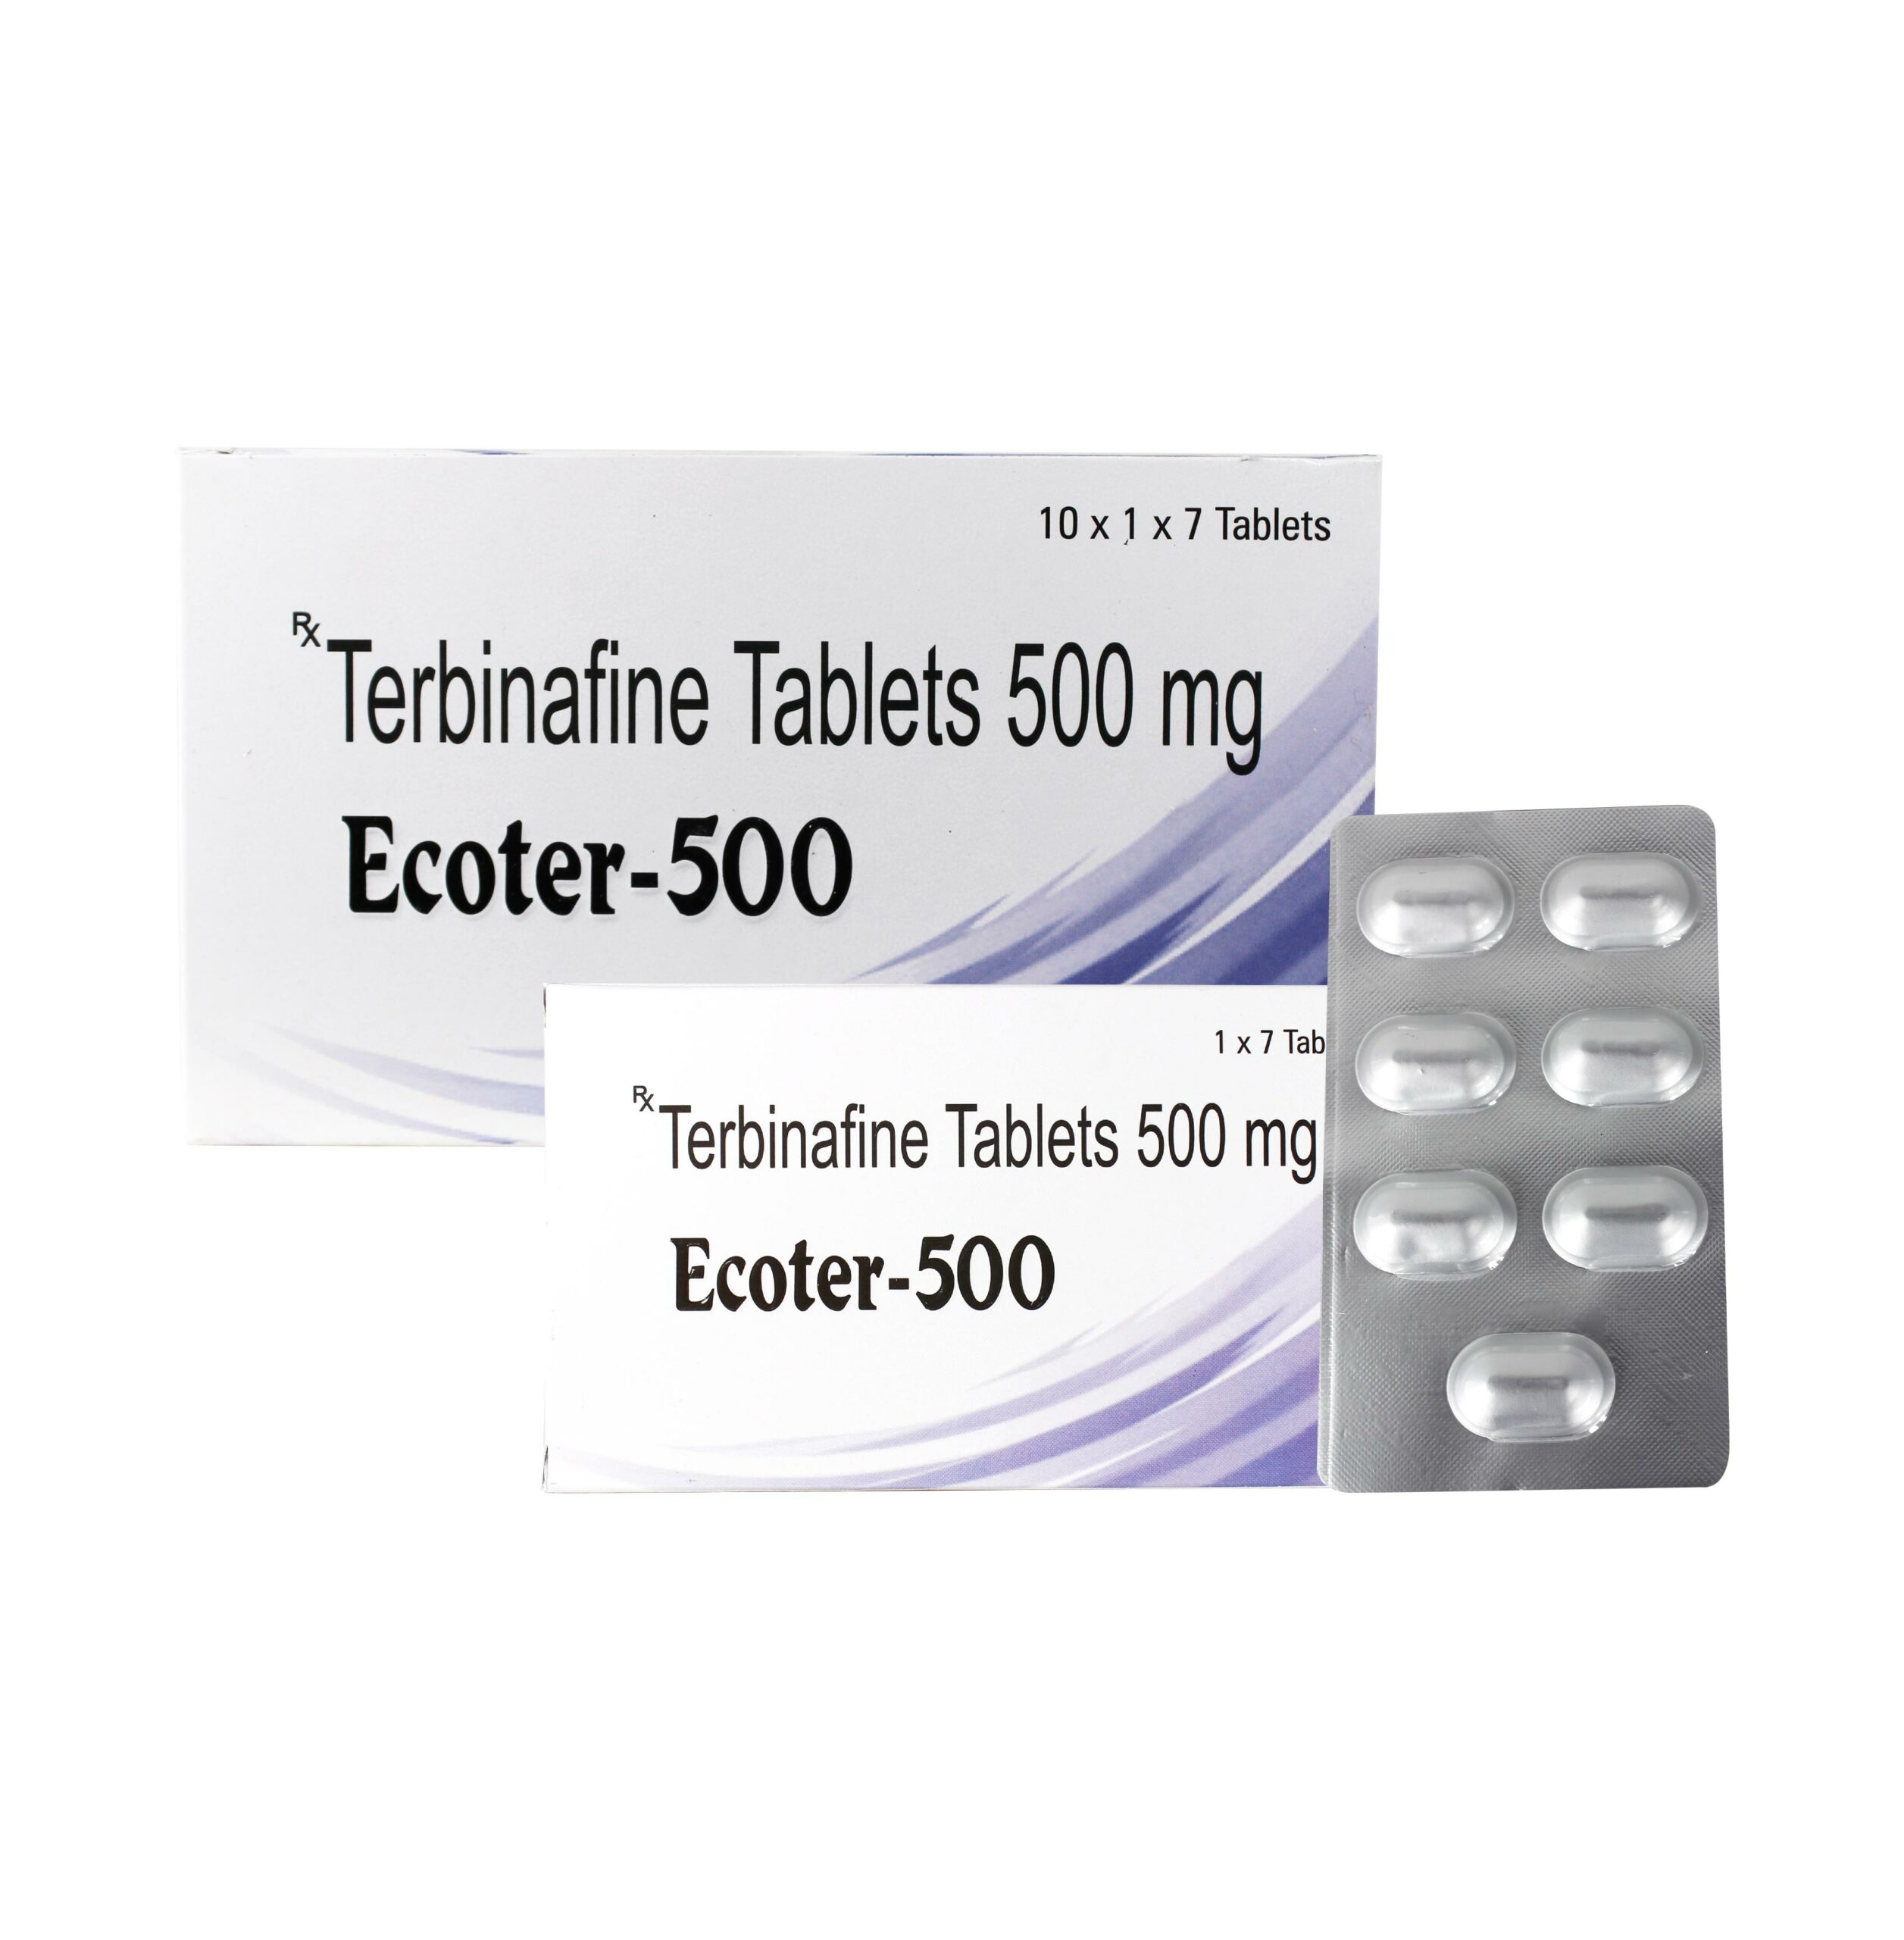 Terbinafine 250 / 500 mg Tablets Manufacturer and Wholesaler Supplier in India